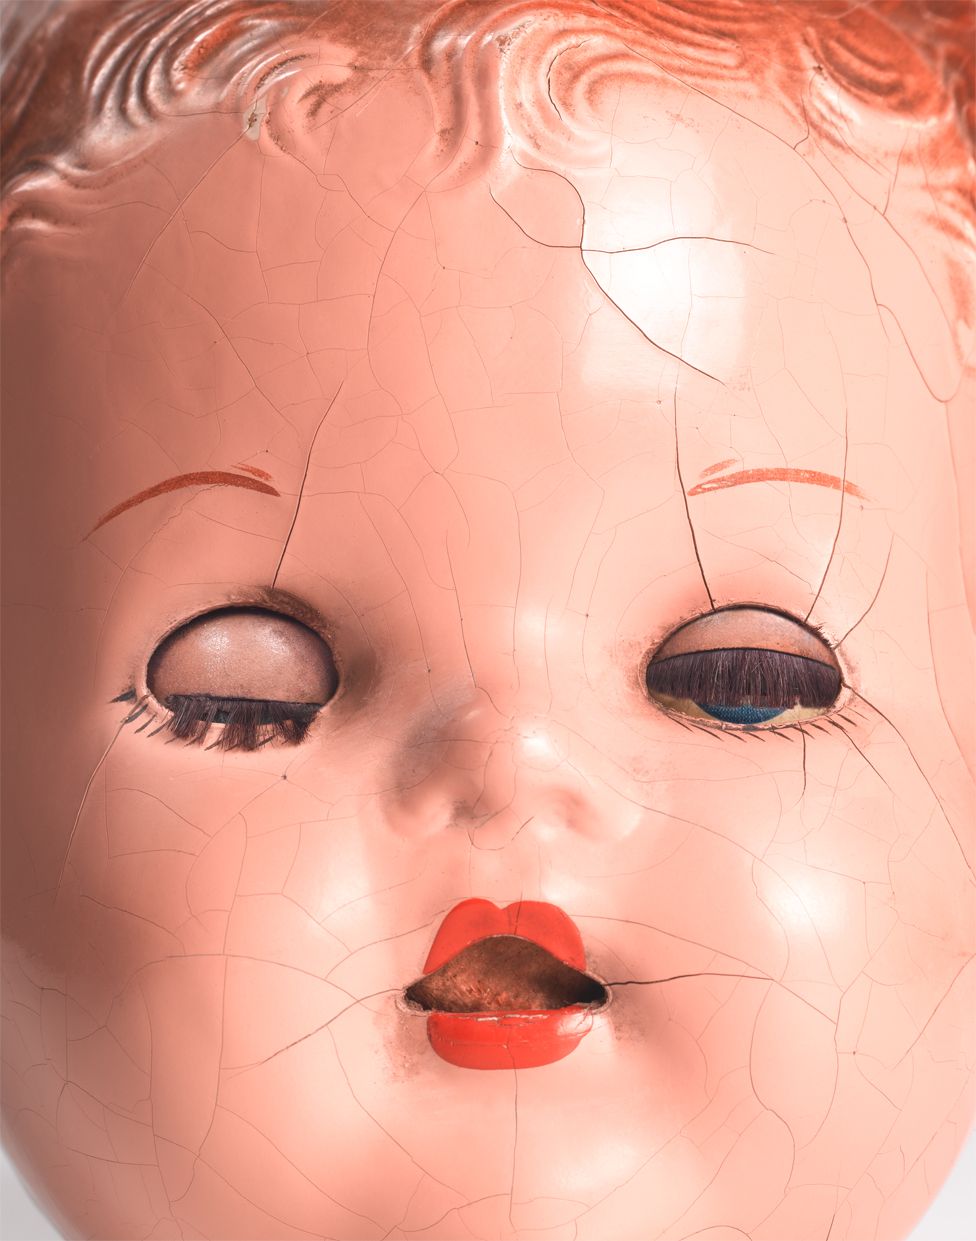 A close-up of a doll's face